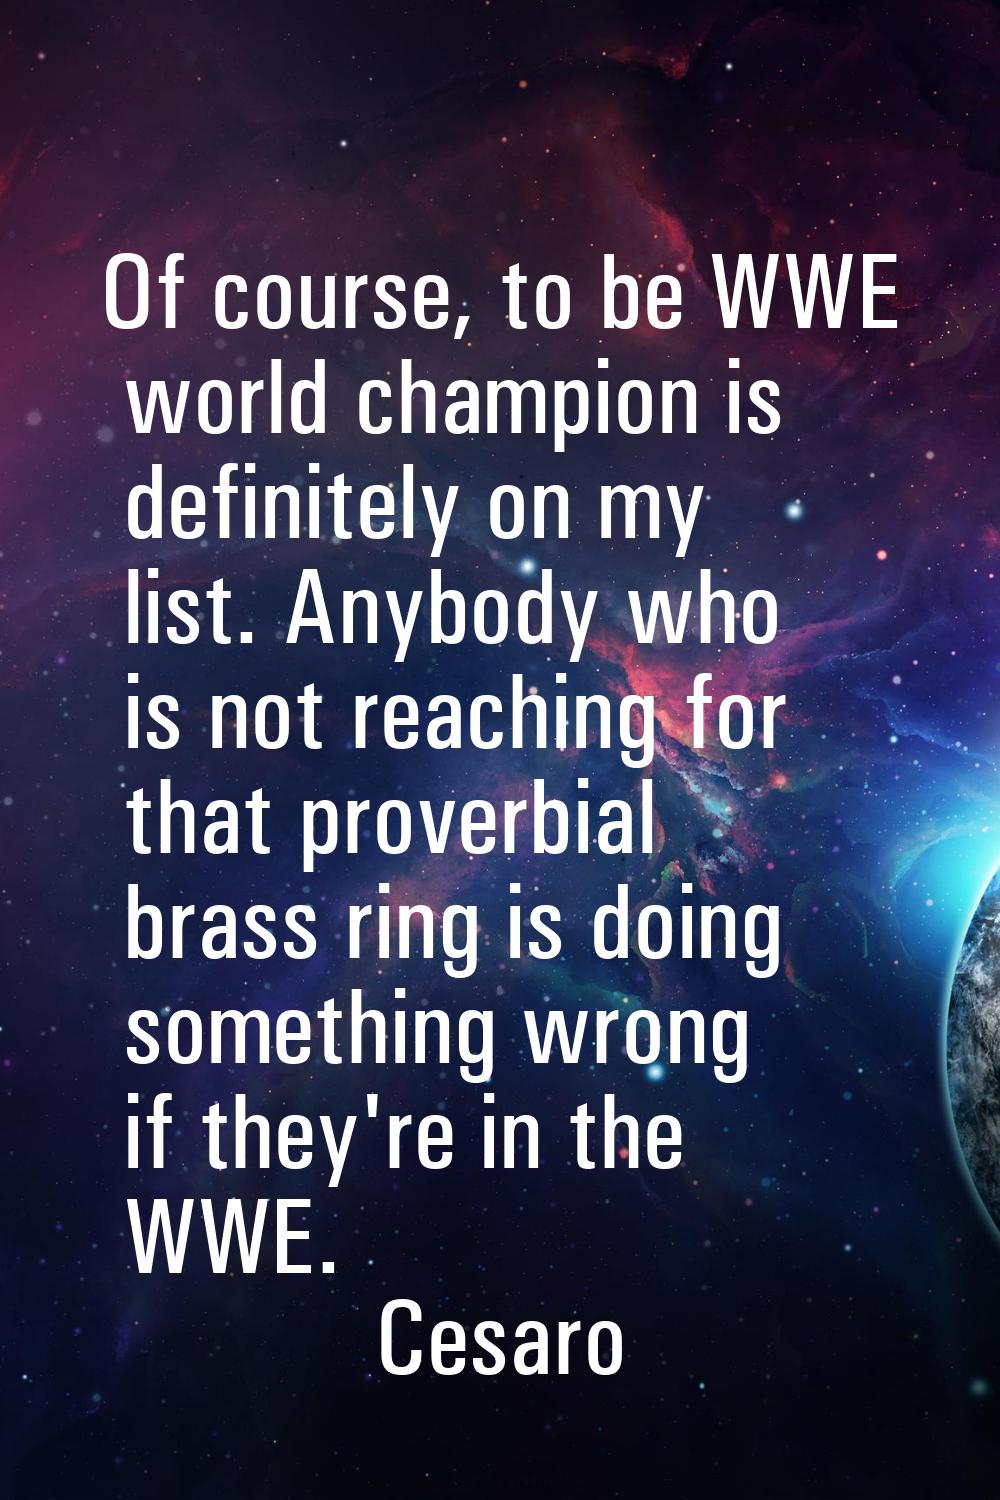 Of course, to be WWE world champion is definitely on my list. Anybody who is not reaching for that 